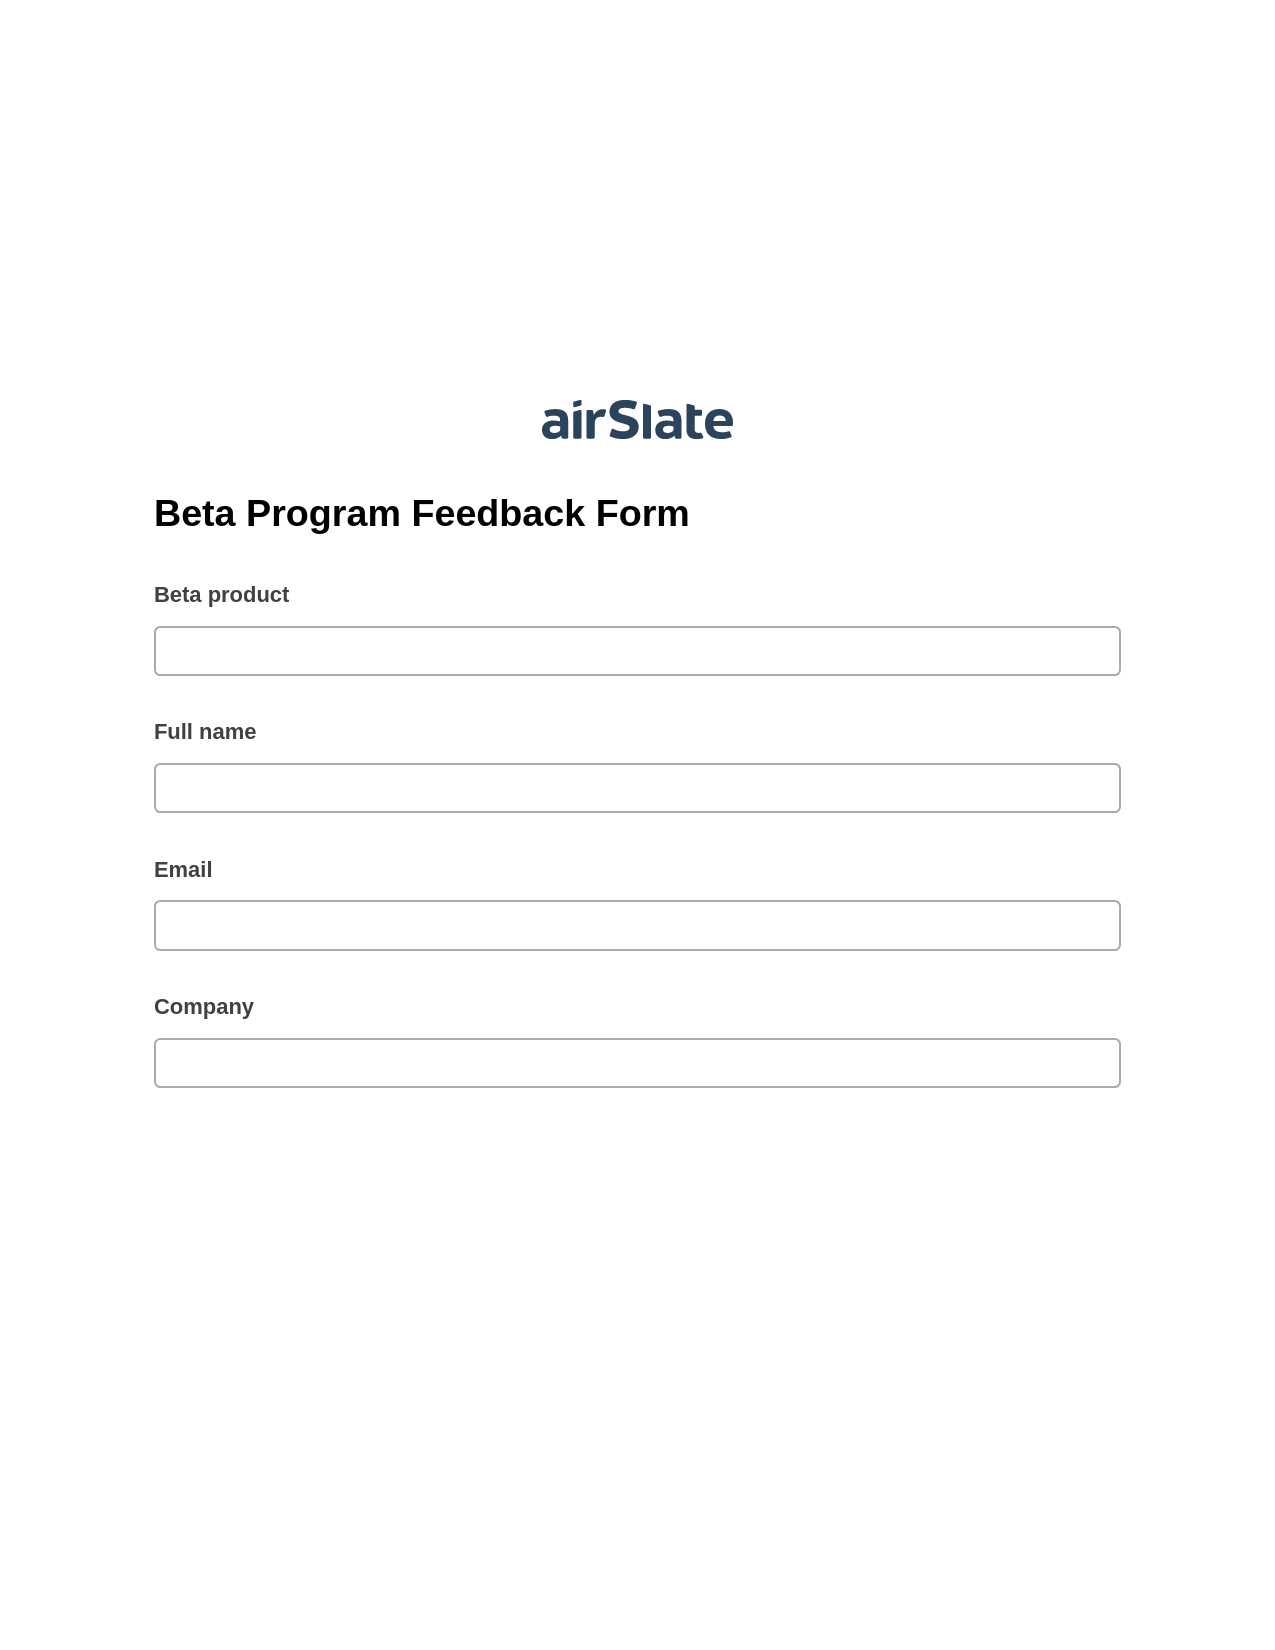 Multirole Beta Program Feedback Form Pre-fill from another Slate Bot, Unassign Role Bot, Archive to SharePoint Folder Bot